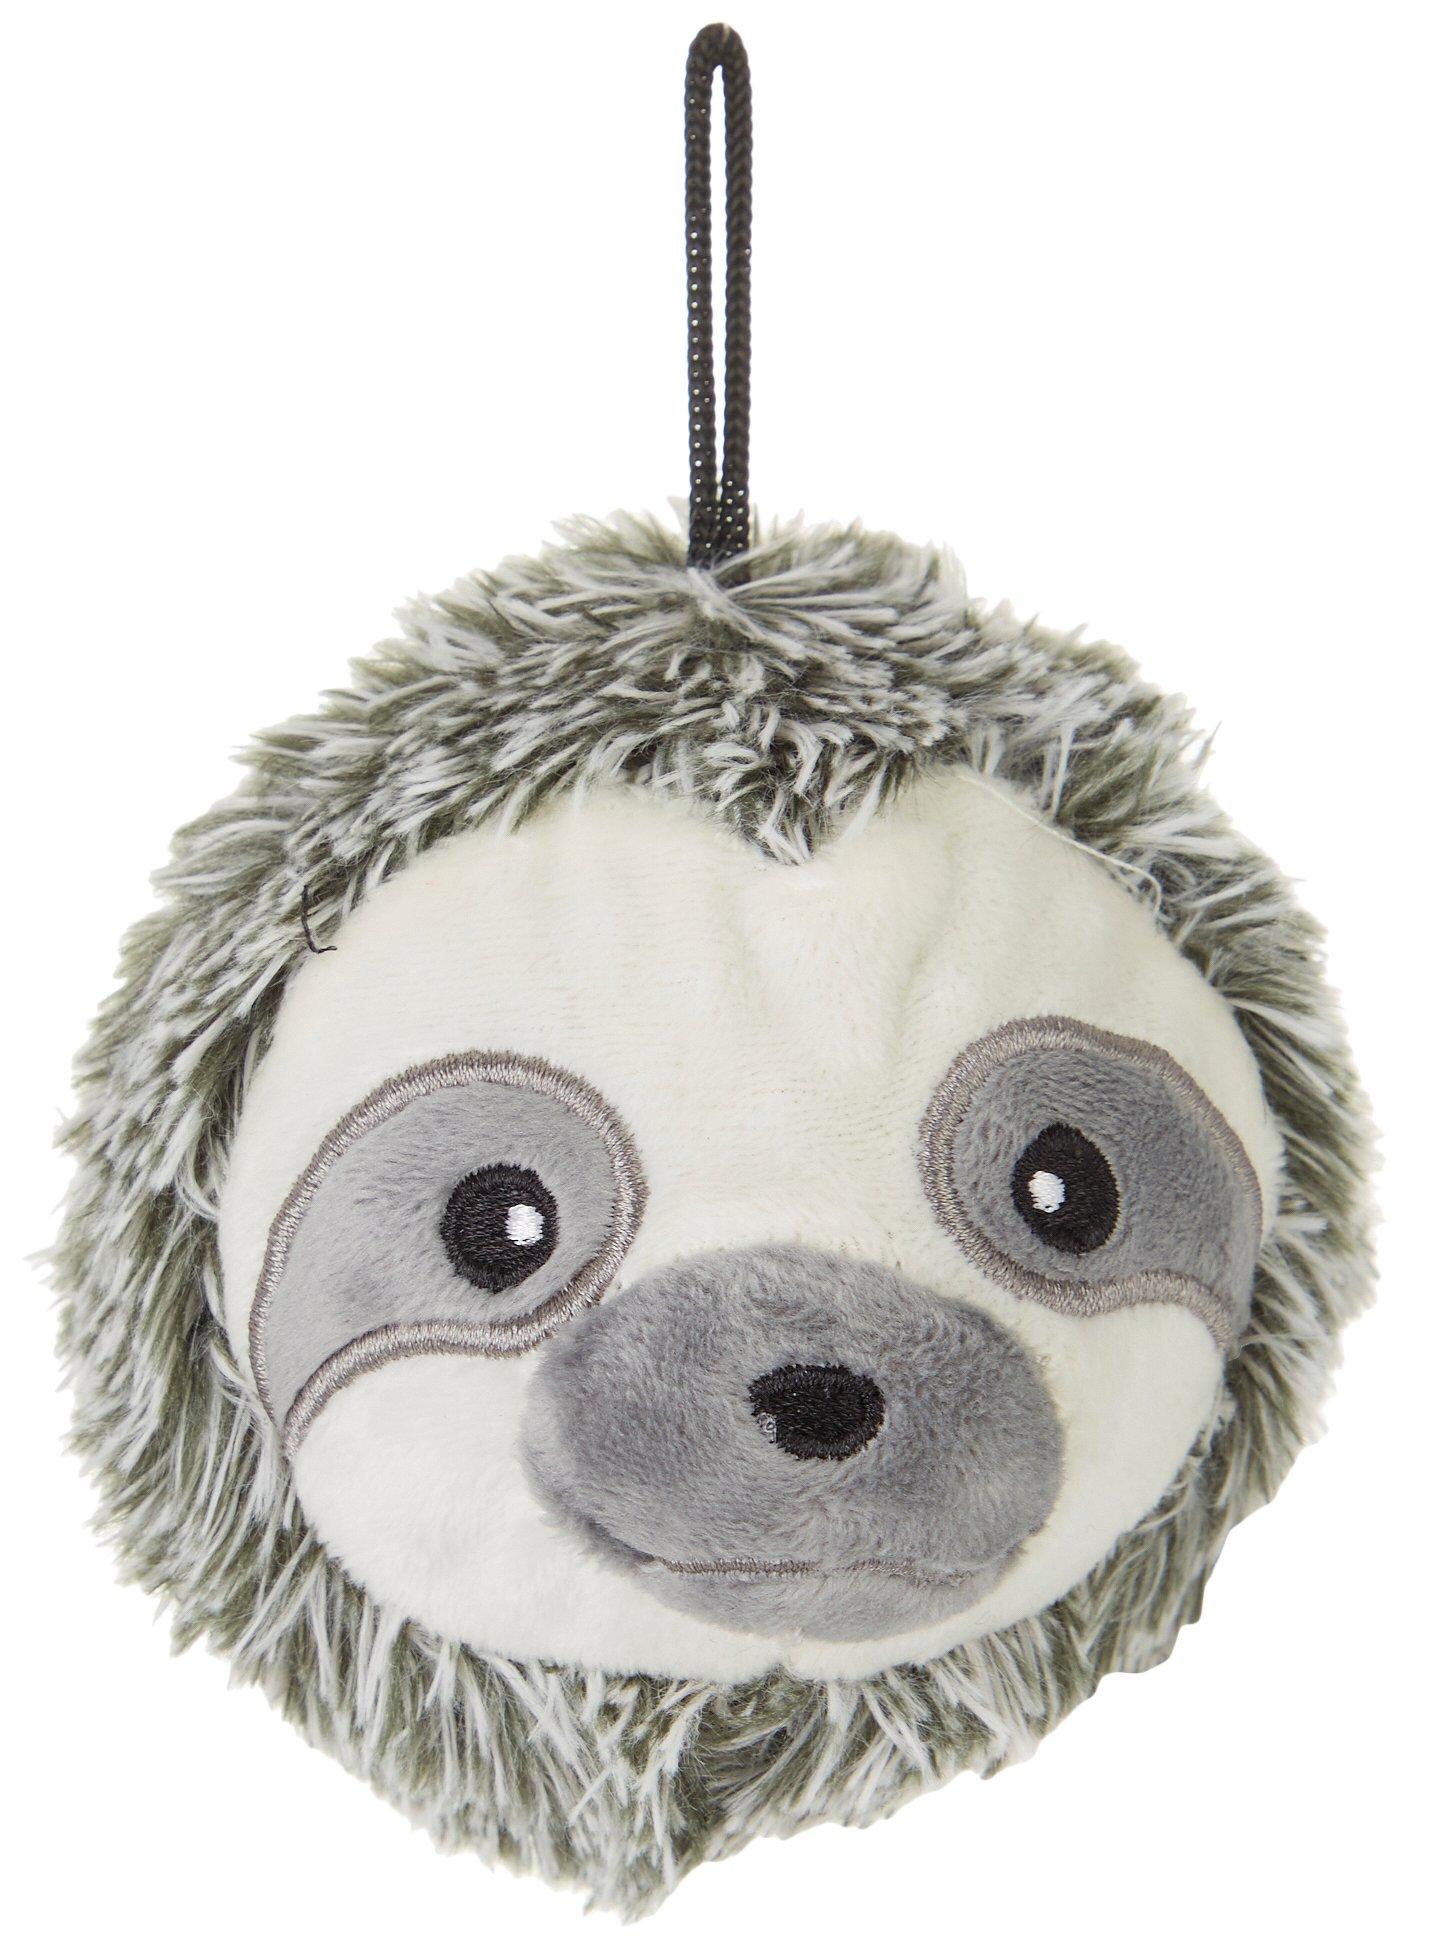 4'' Squeaky Sloth Dog Toy